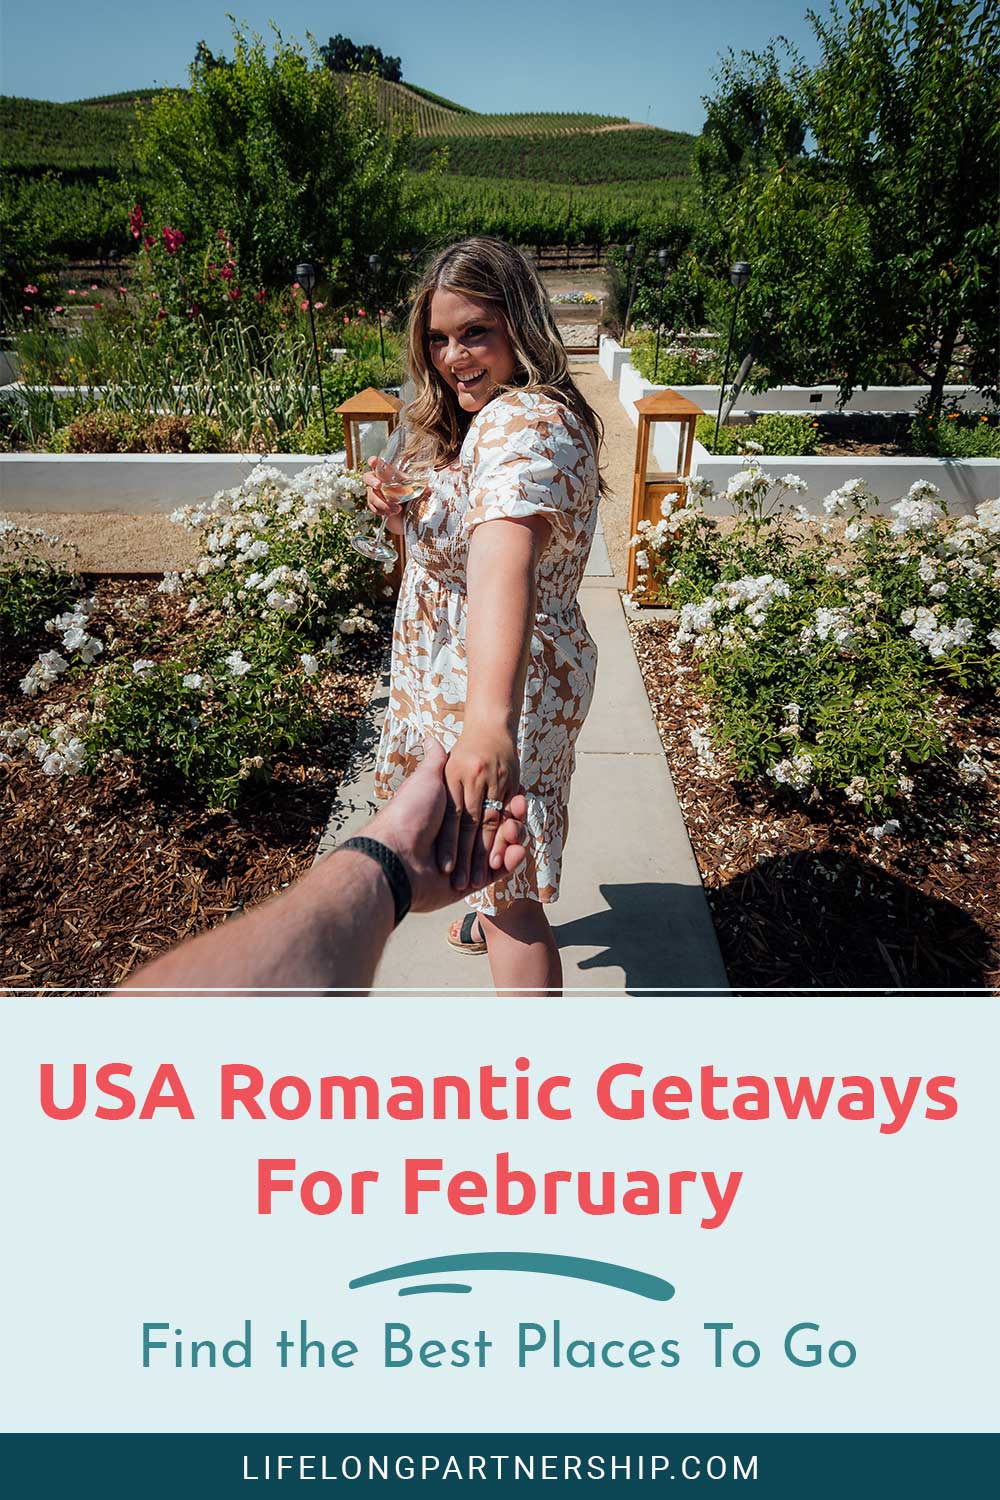 Woman in holding her partner's hand and smiling - USA Romantic Getaways For February - Find the Best Places To Go